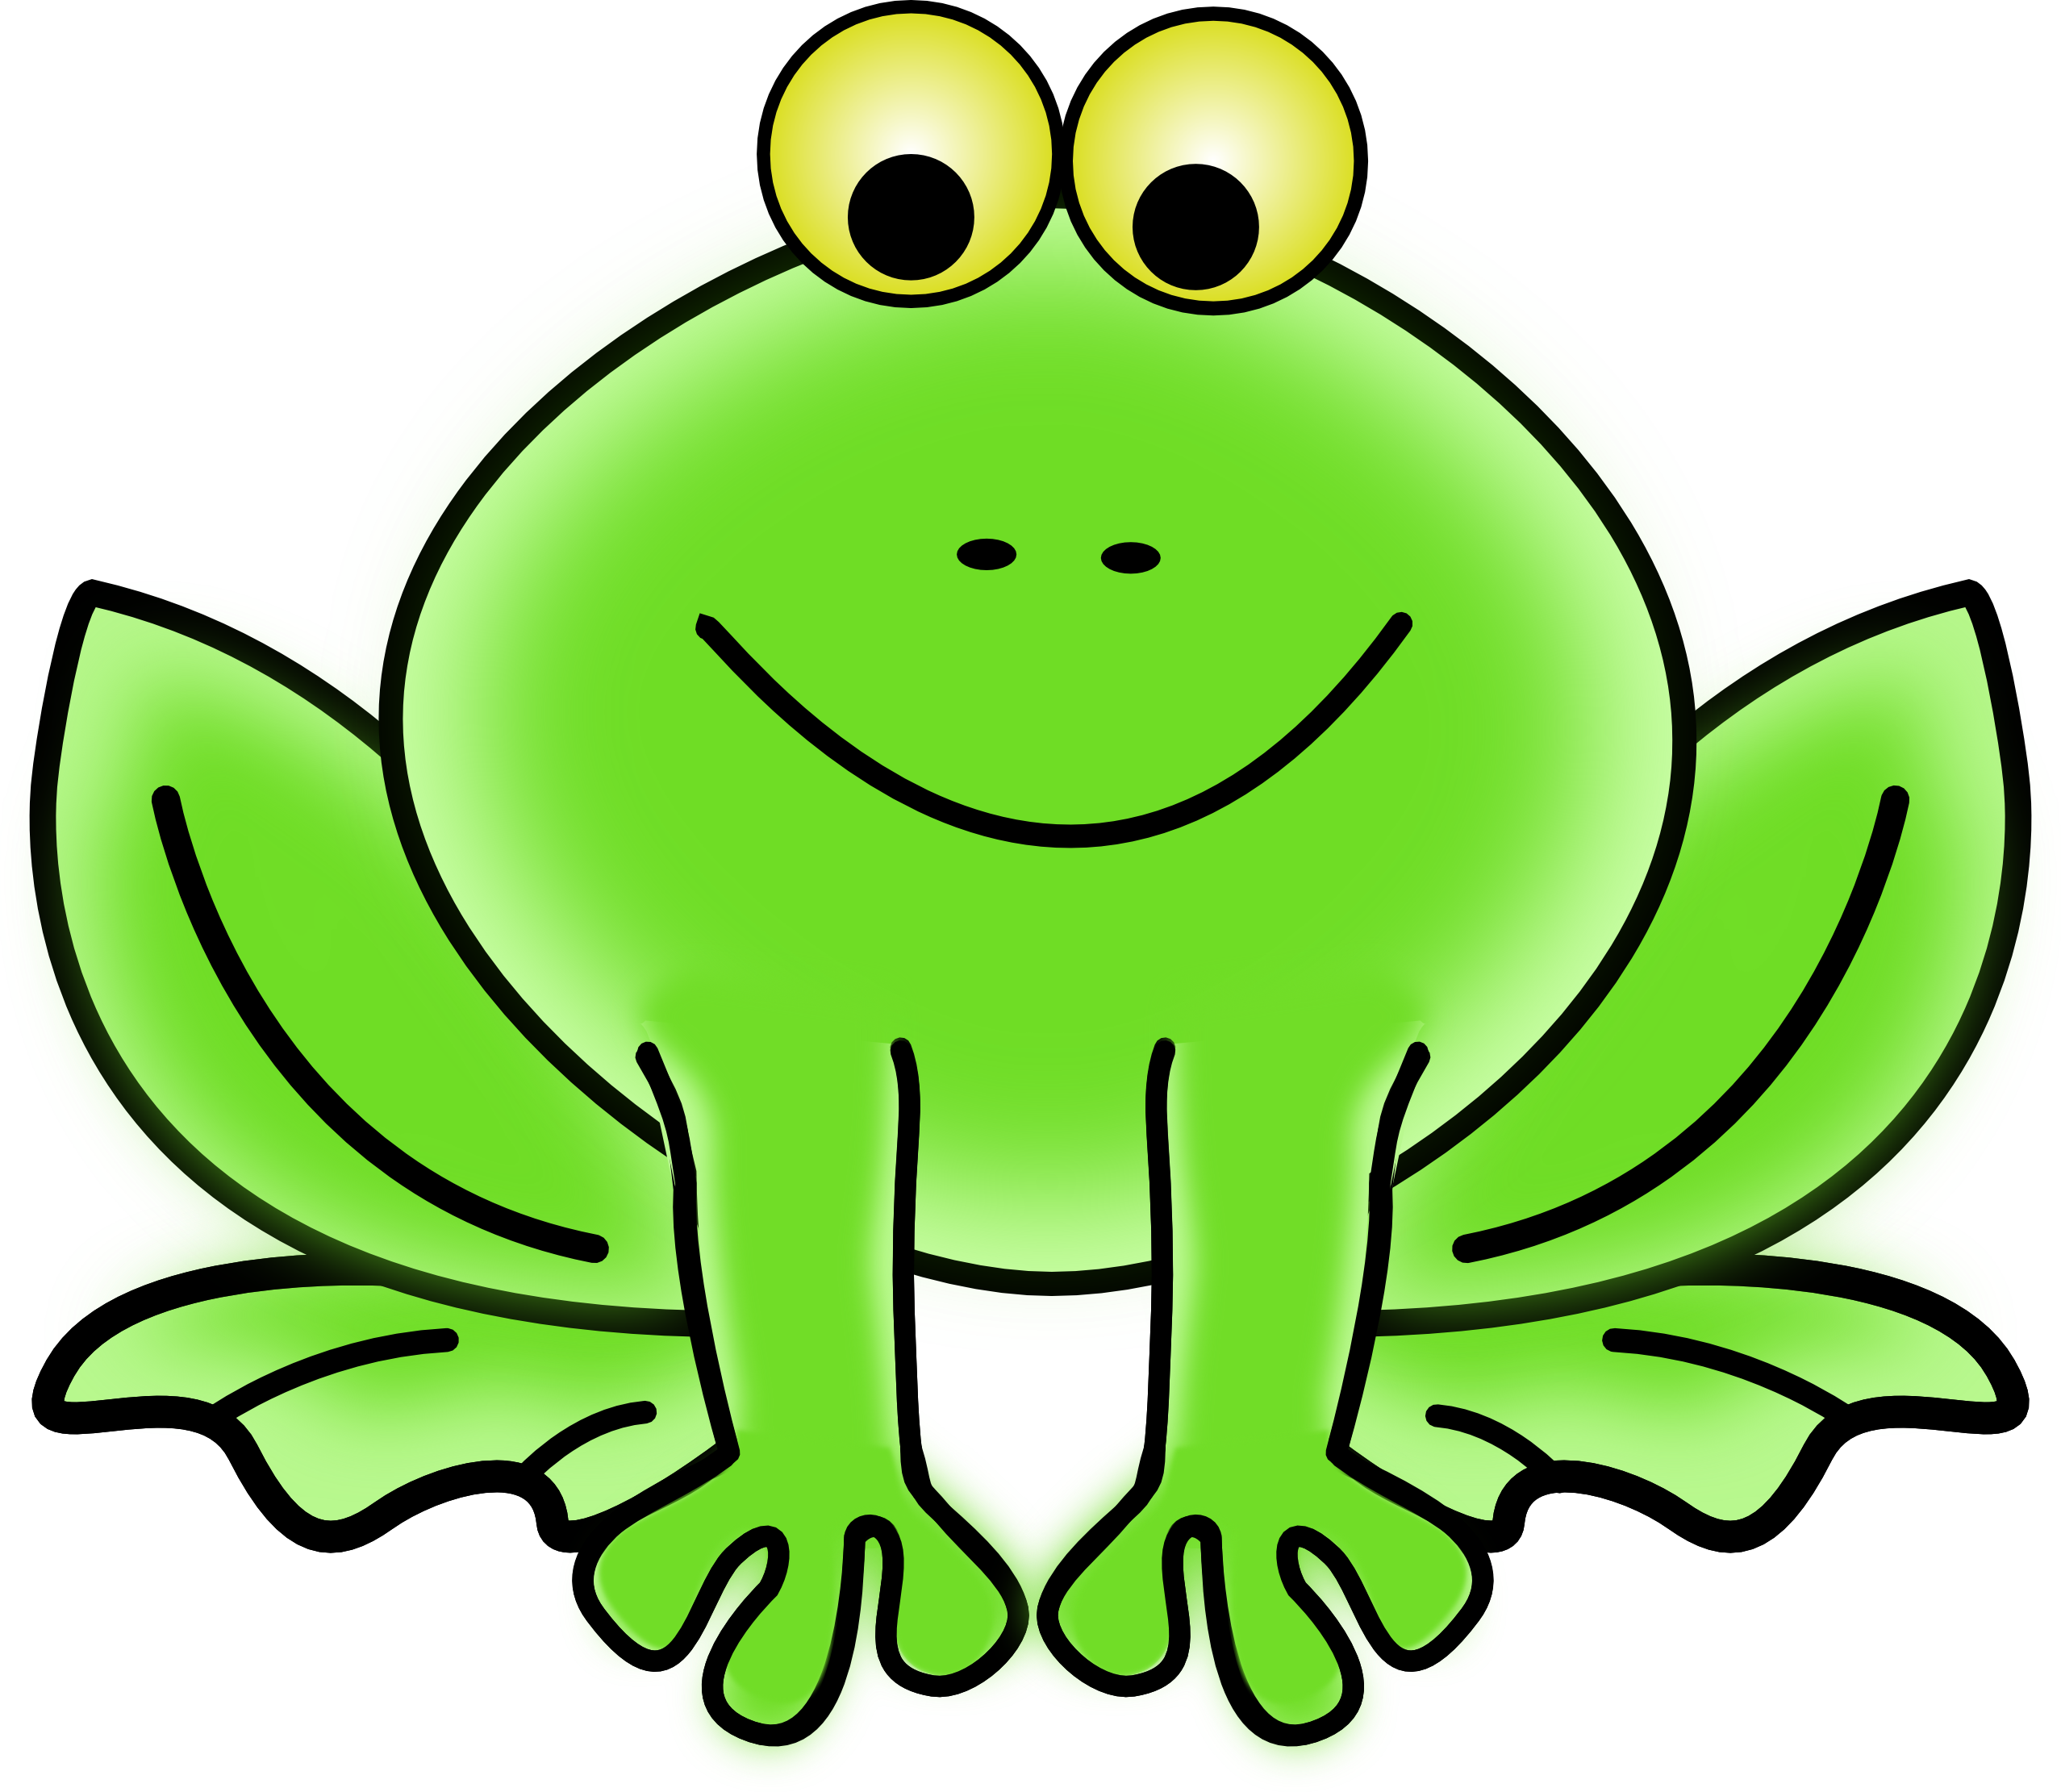 Frog clip art for teachers free clipart images